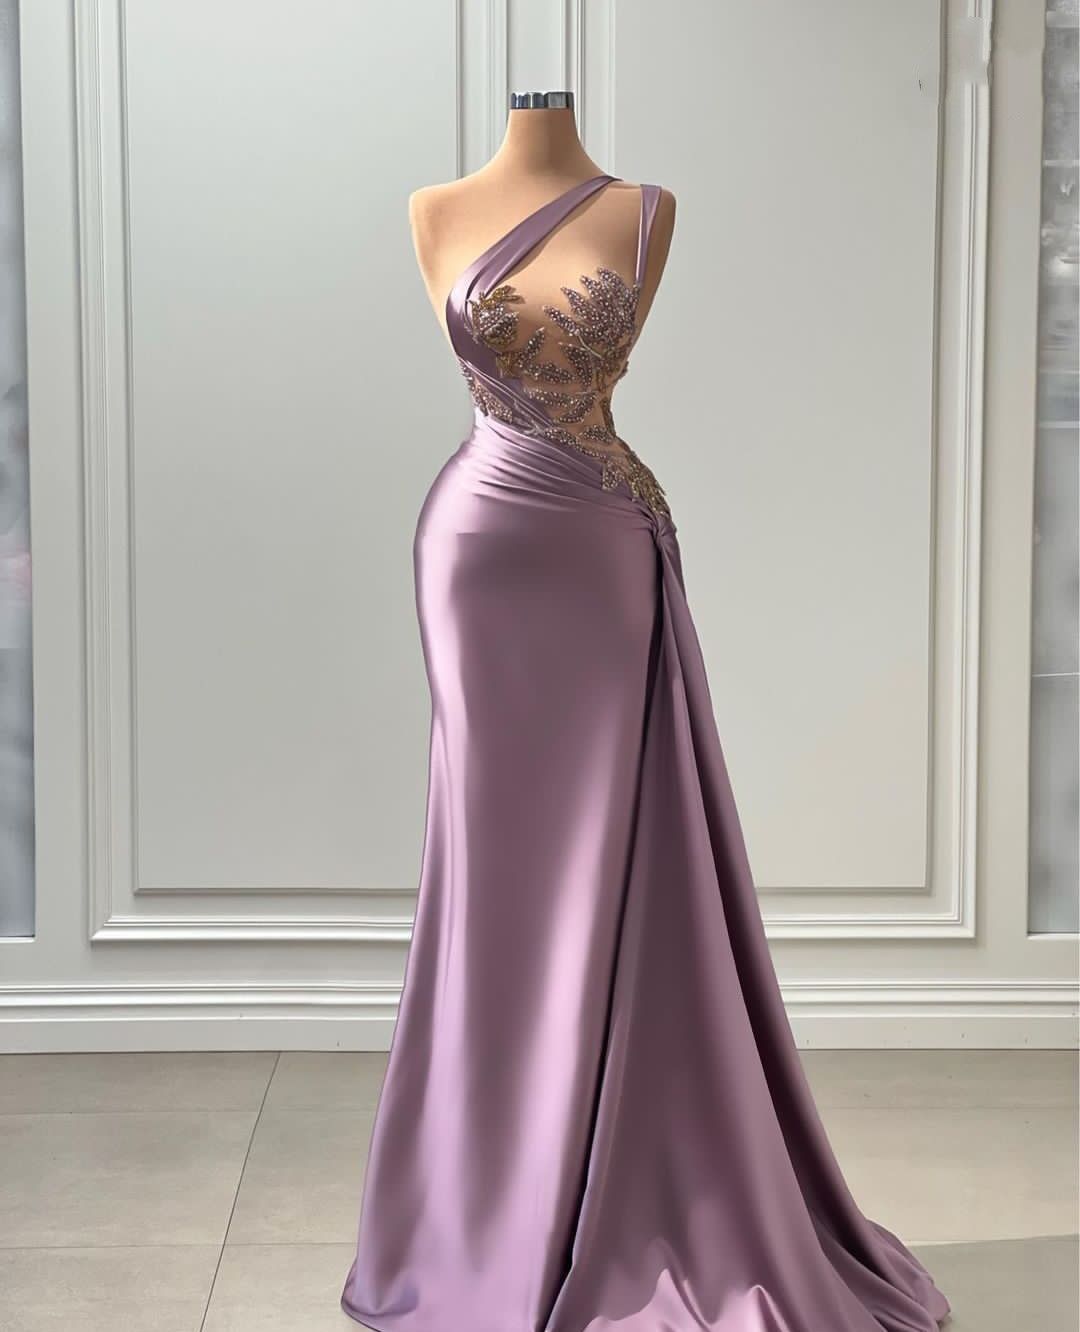 2023 Sexy Lilac Light Purple Prom Dresses Mermaid One Shoulder Illusion Crystal Beads Evening Gowns Cutaway Sides Plus Size Formal Party Dress